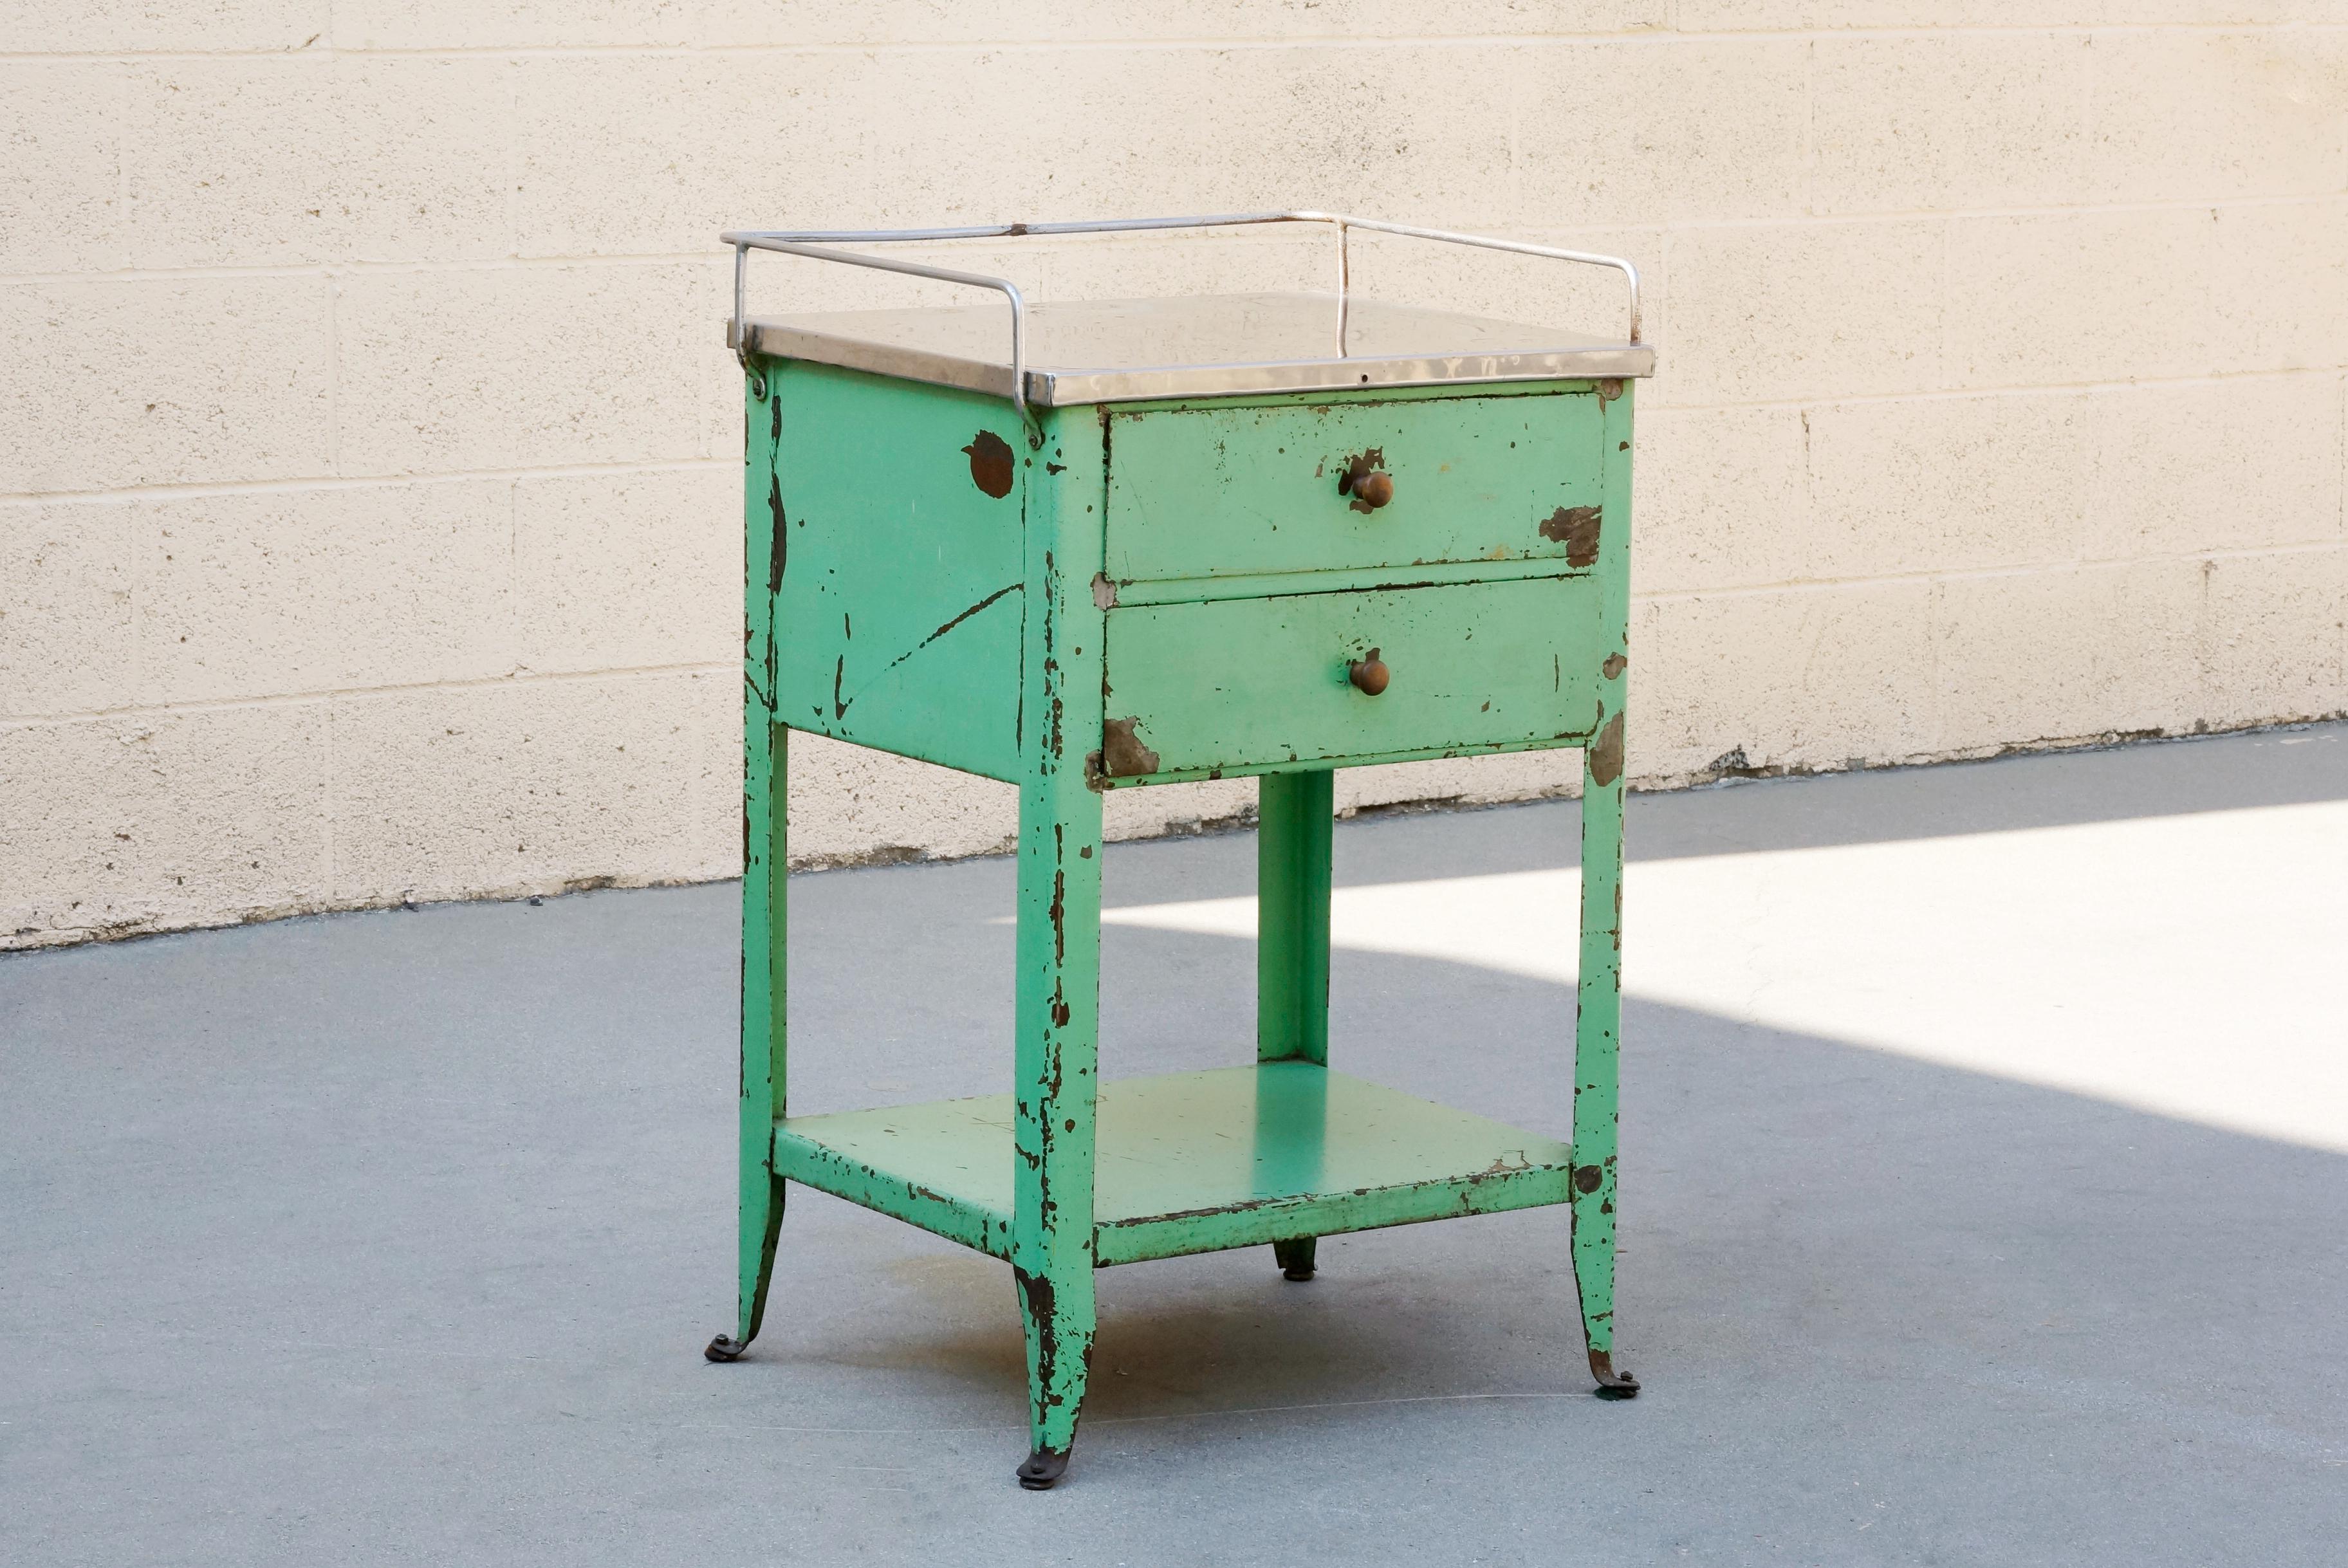 1920s industrial side table with stainless steel tray top. Possibly from a hospital setting. Features two drawers and bottom shelf. Weathered original green patina and wood pulls. 

Dimensions: 21